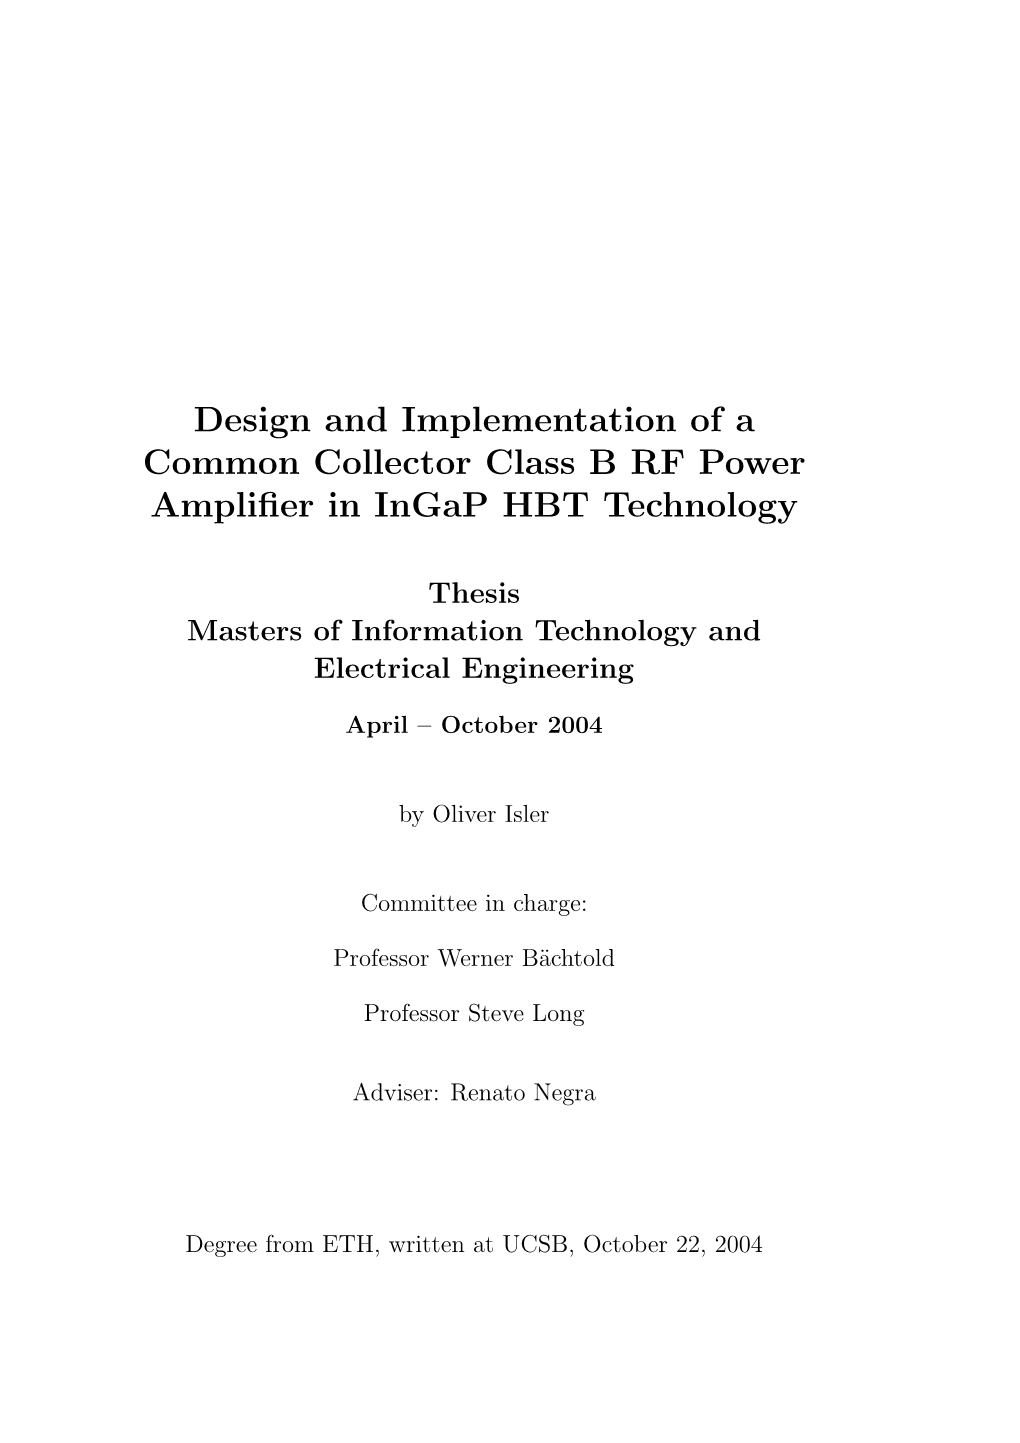 Design of Common Collector Class B RF Power Amplifier in Ingap HBT